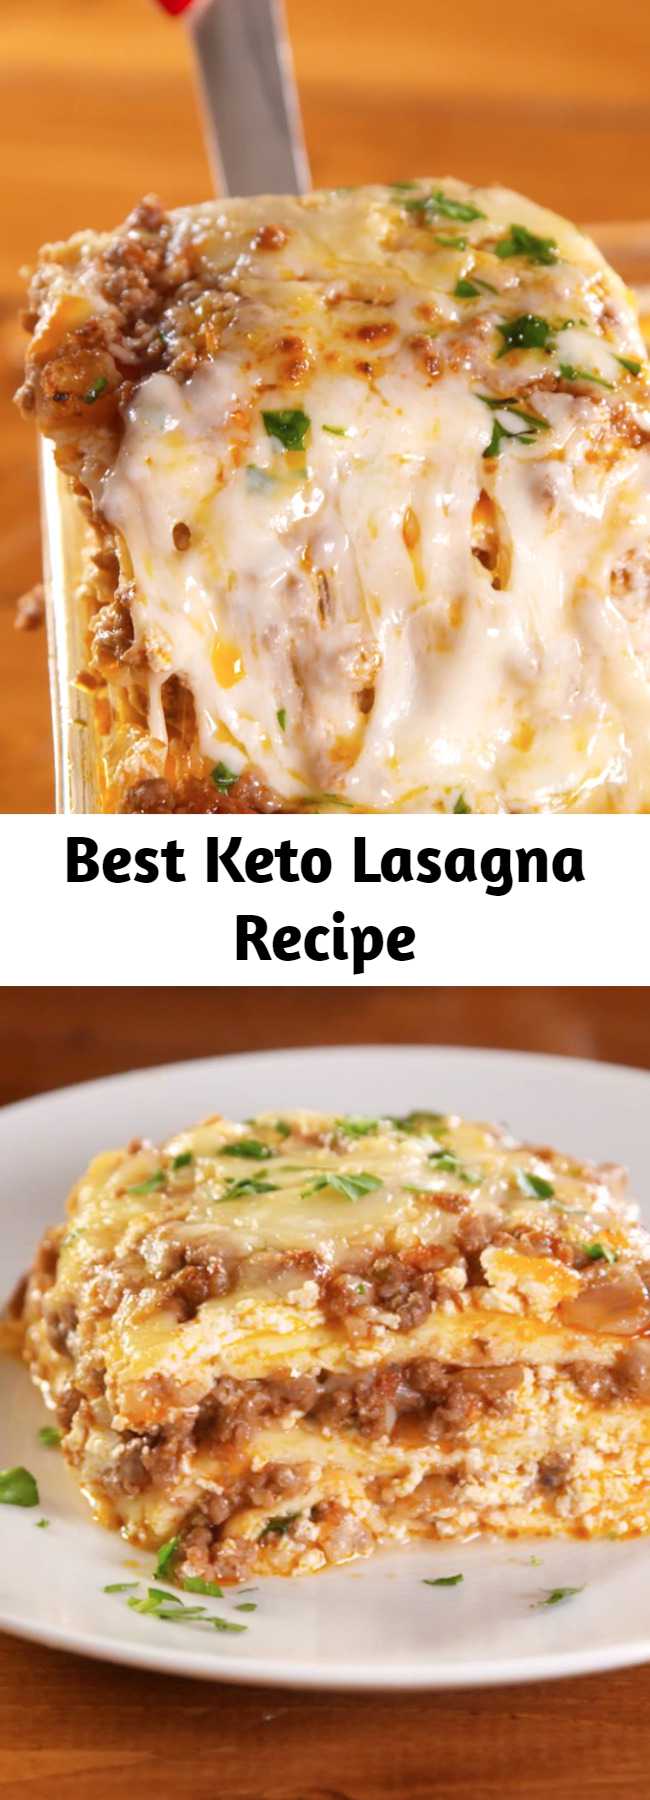 Best Keto Lasagna Recipe - Going Keto can be hard when you start thinking about what you'll be missing. Luckily, a classic lasagna won't be one of them. This lasagna uses a simple noodle replacement that once it's covered in meat and cheese, feels just like pasta. It's the comforting dish you no longer have to crave. #easy #recipe #keto #lasagna #ketorecipes #lowcarb #groundbeef #noodless